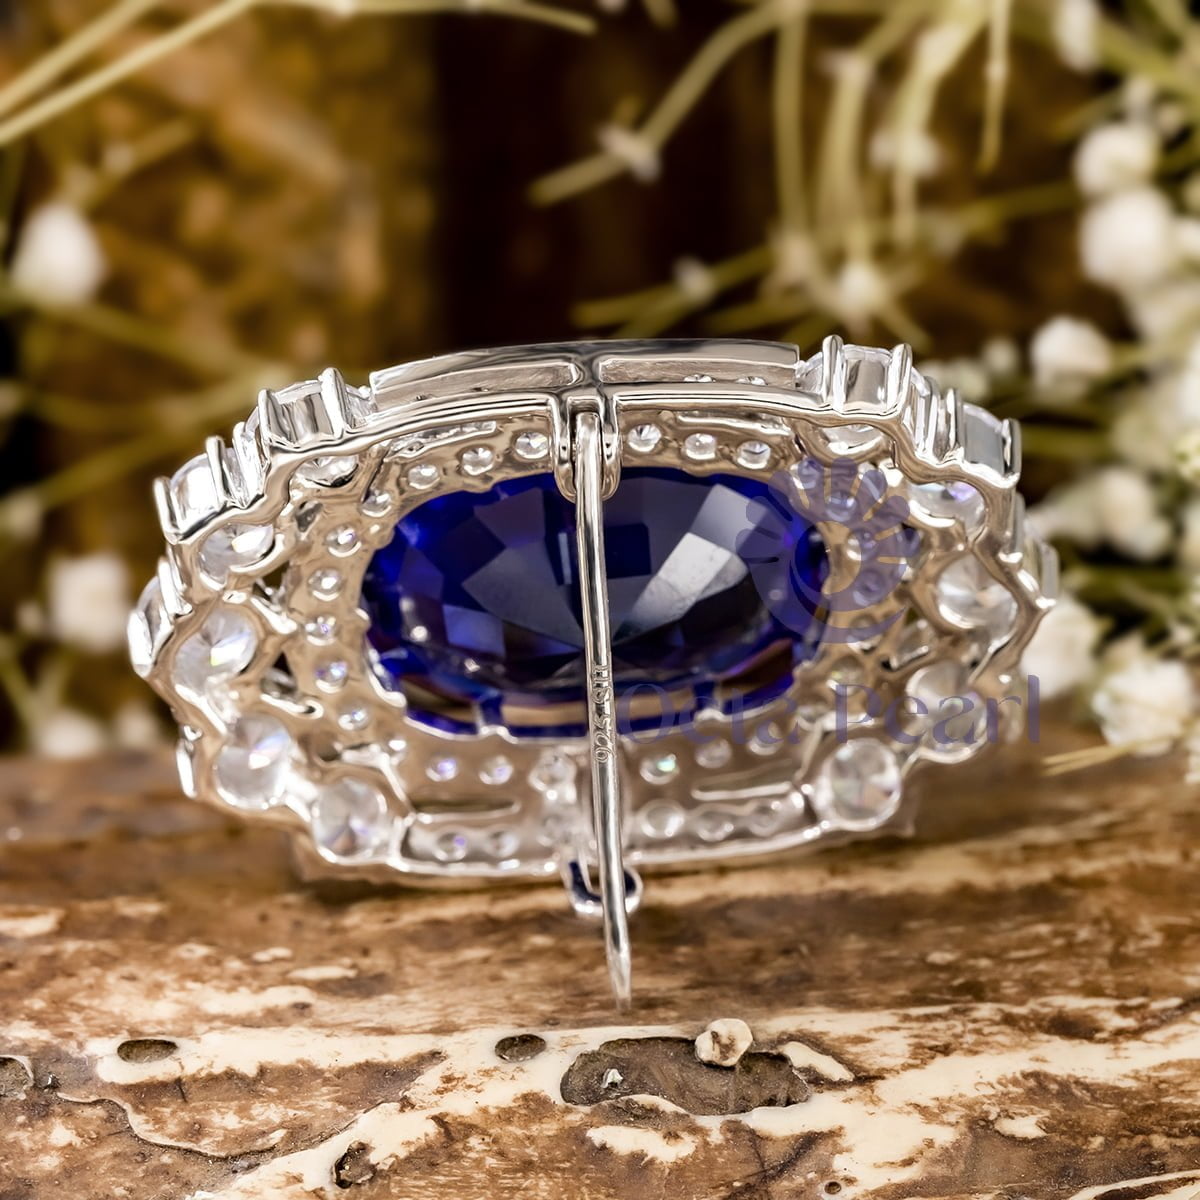 Blue Sapphire Oval With Round Cut CZ Stone Royal Look Pretty Brooch In 925 Silver